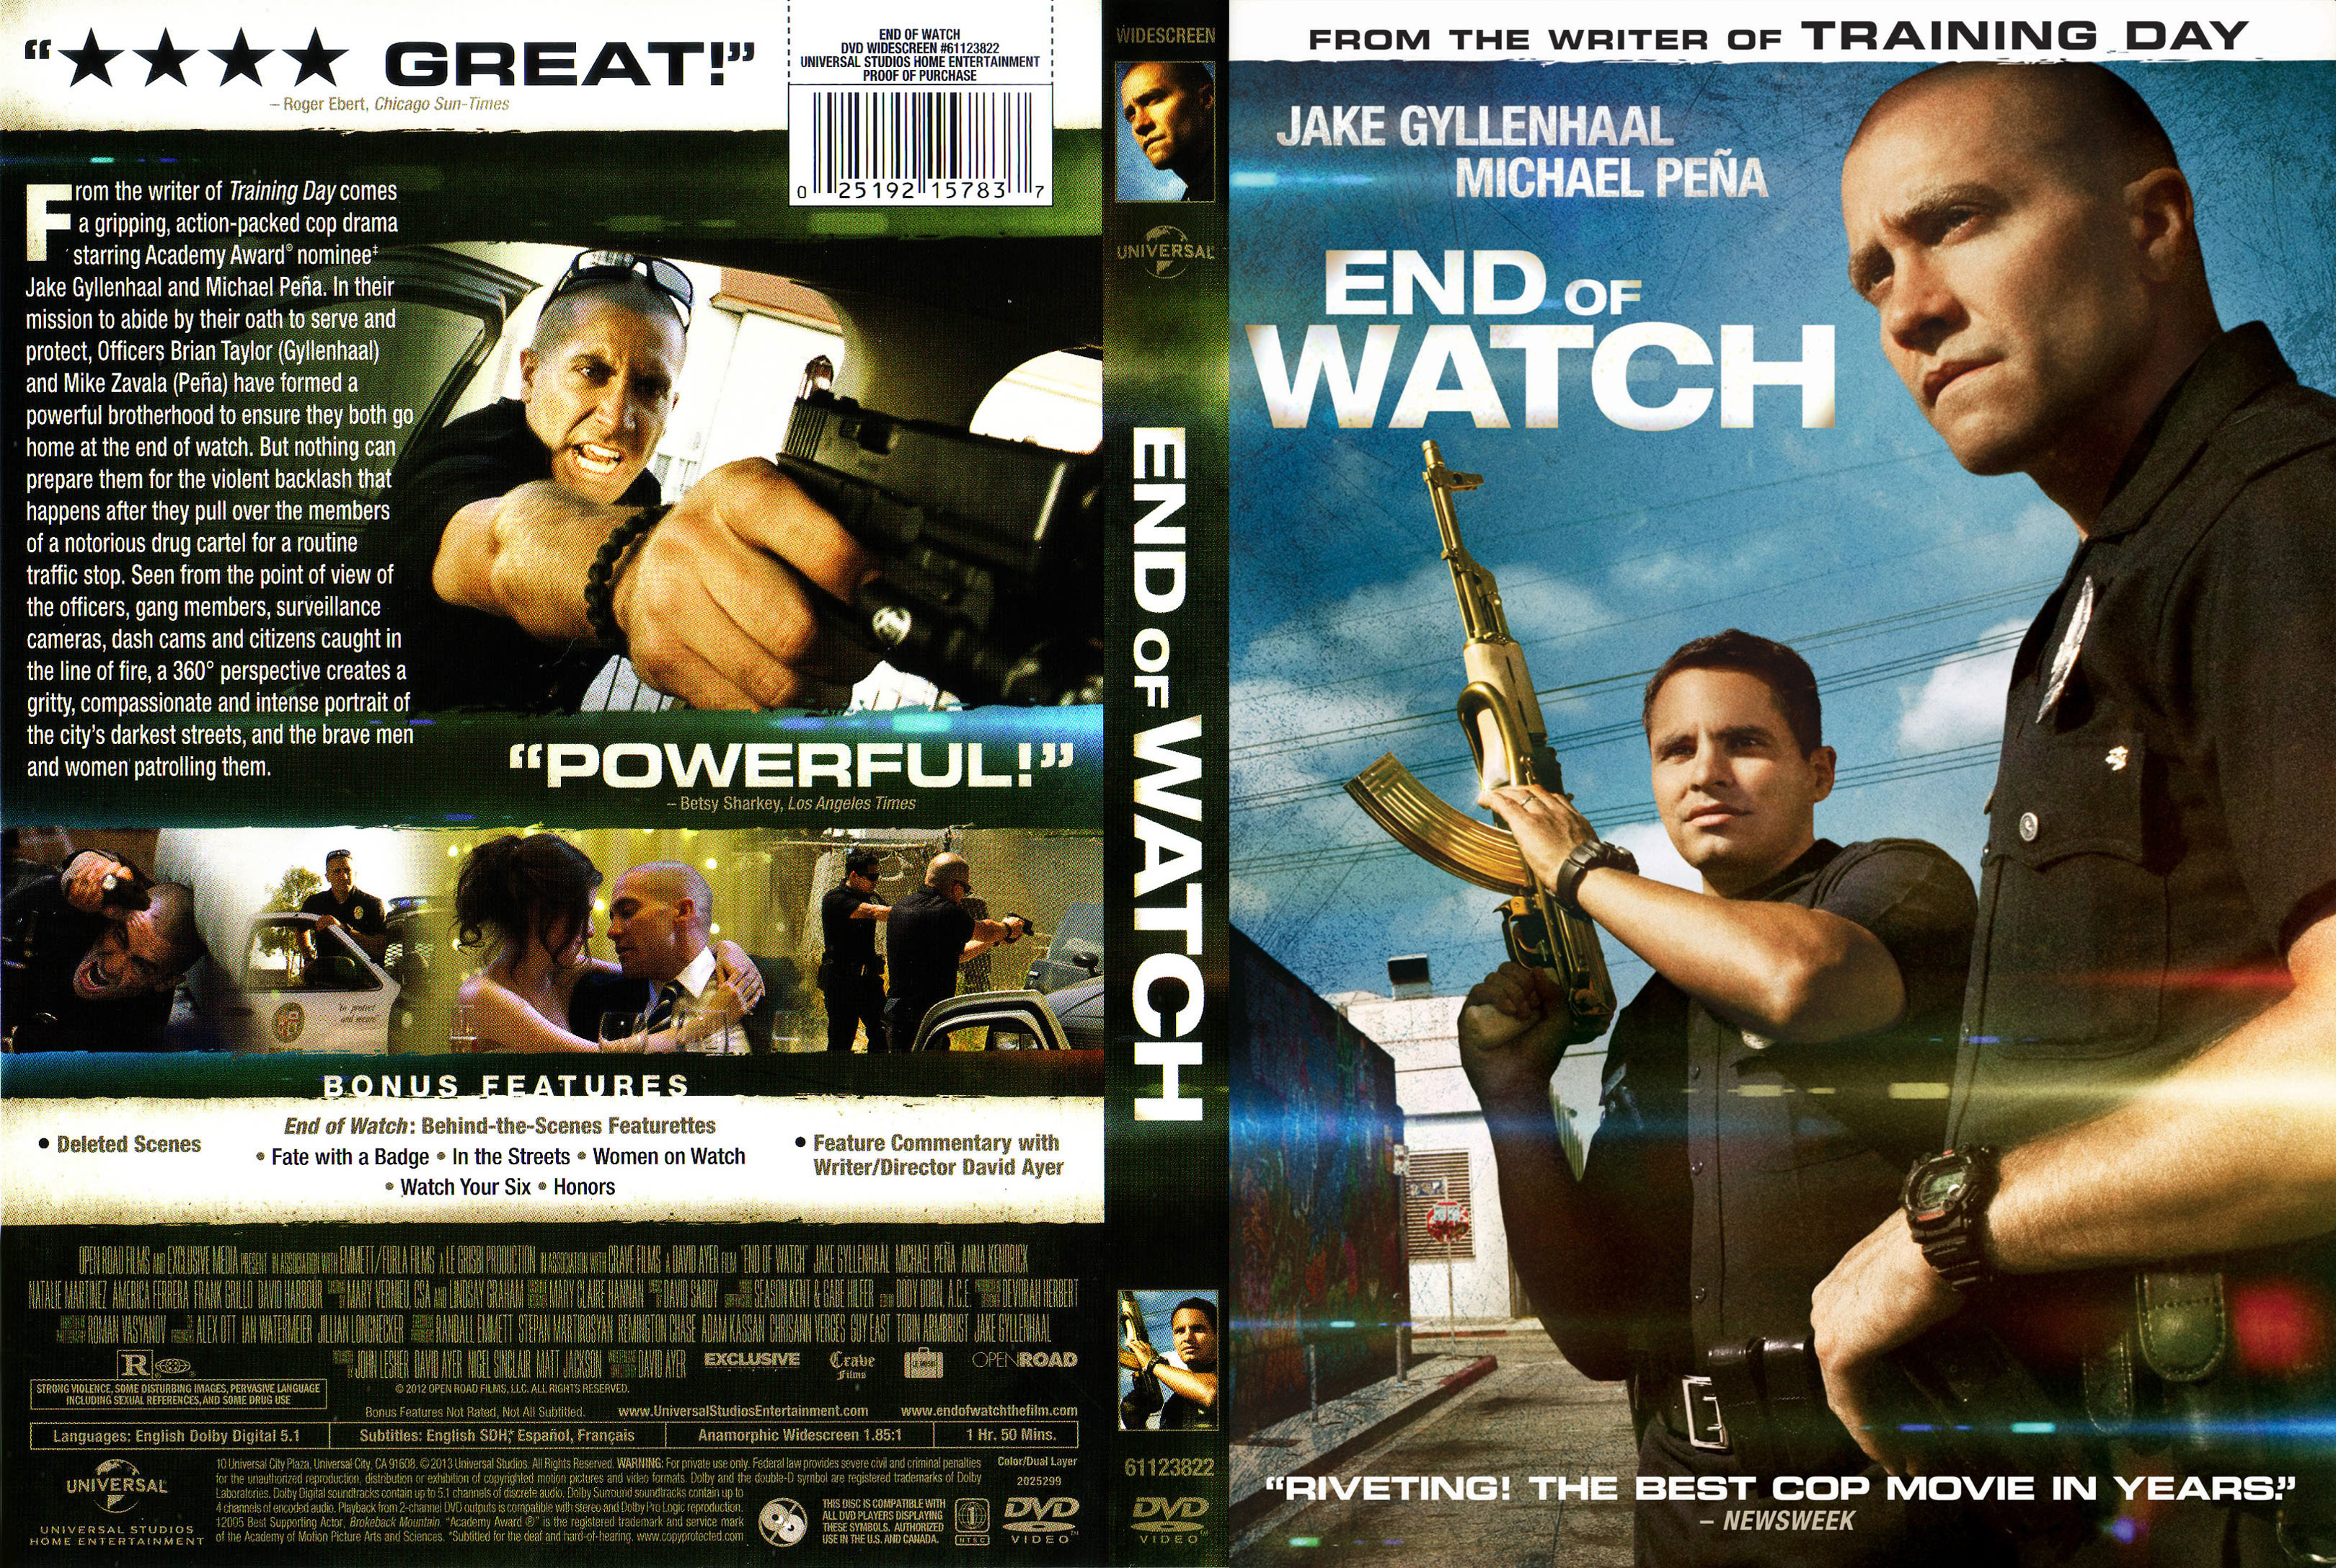 Jaquette DVD End Of Watch Zone 1